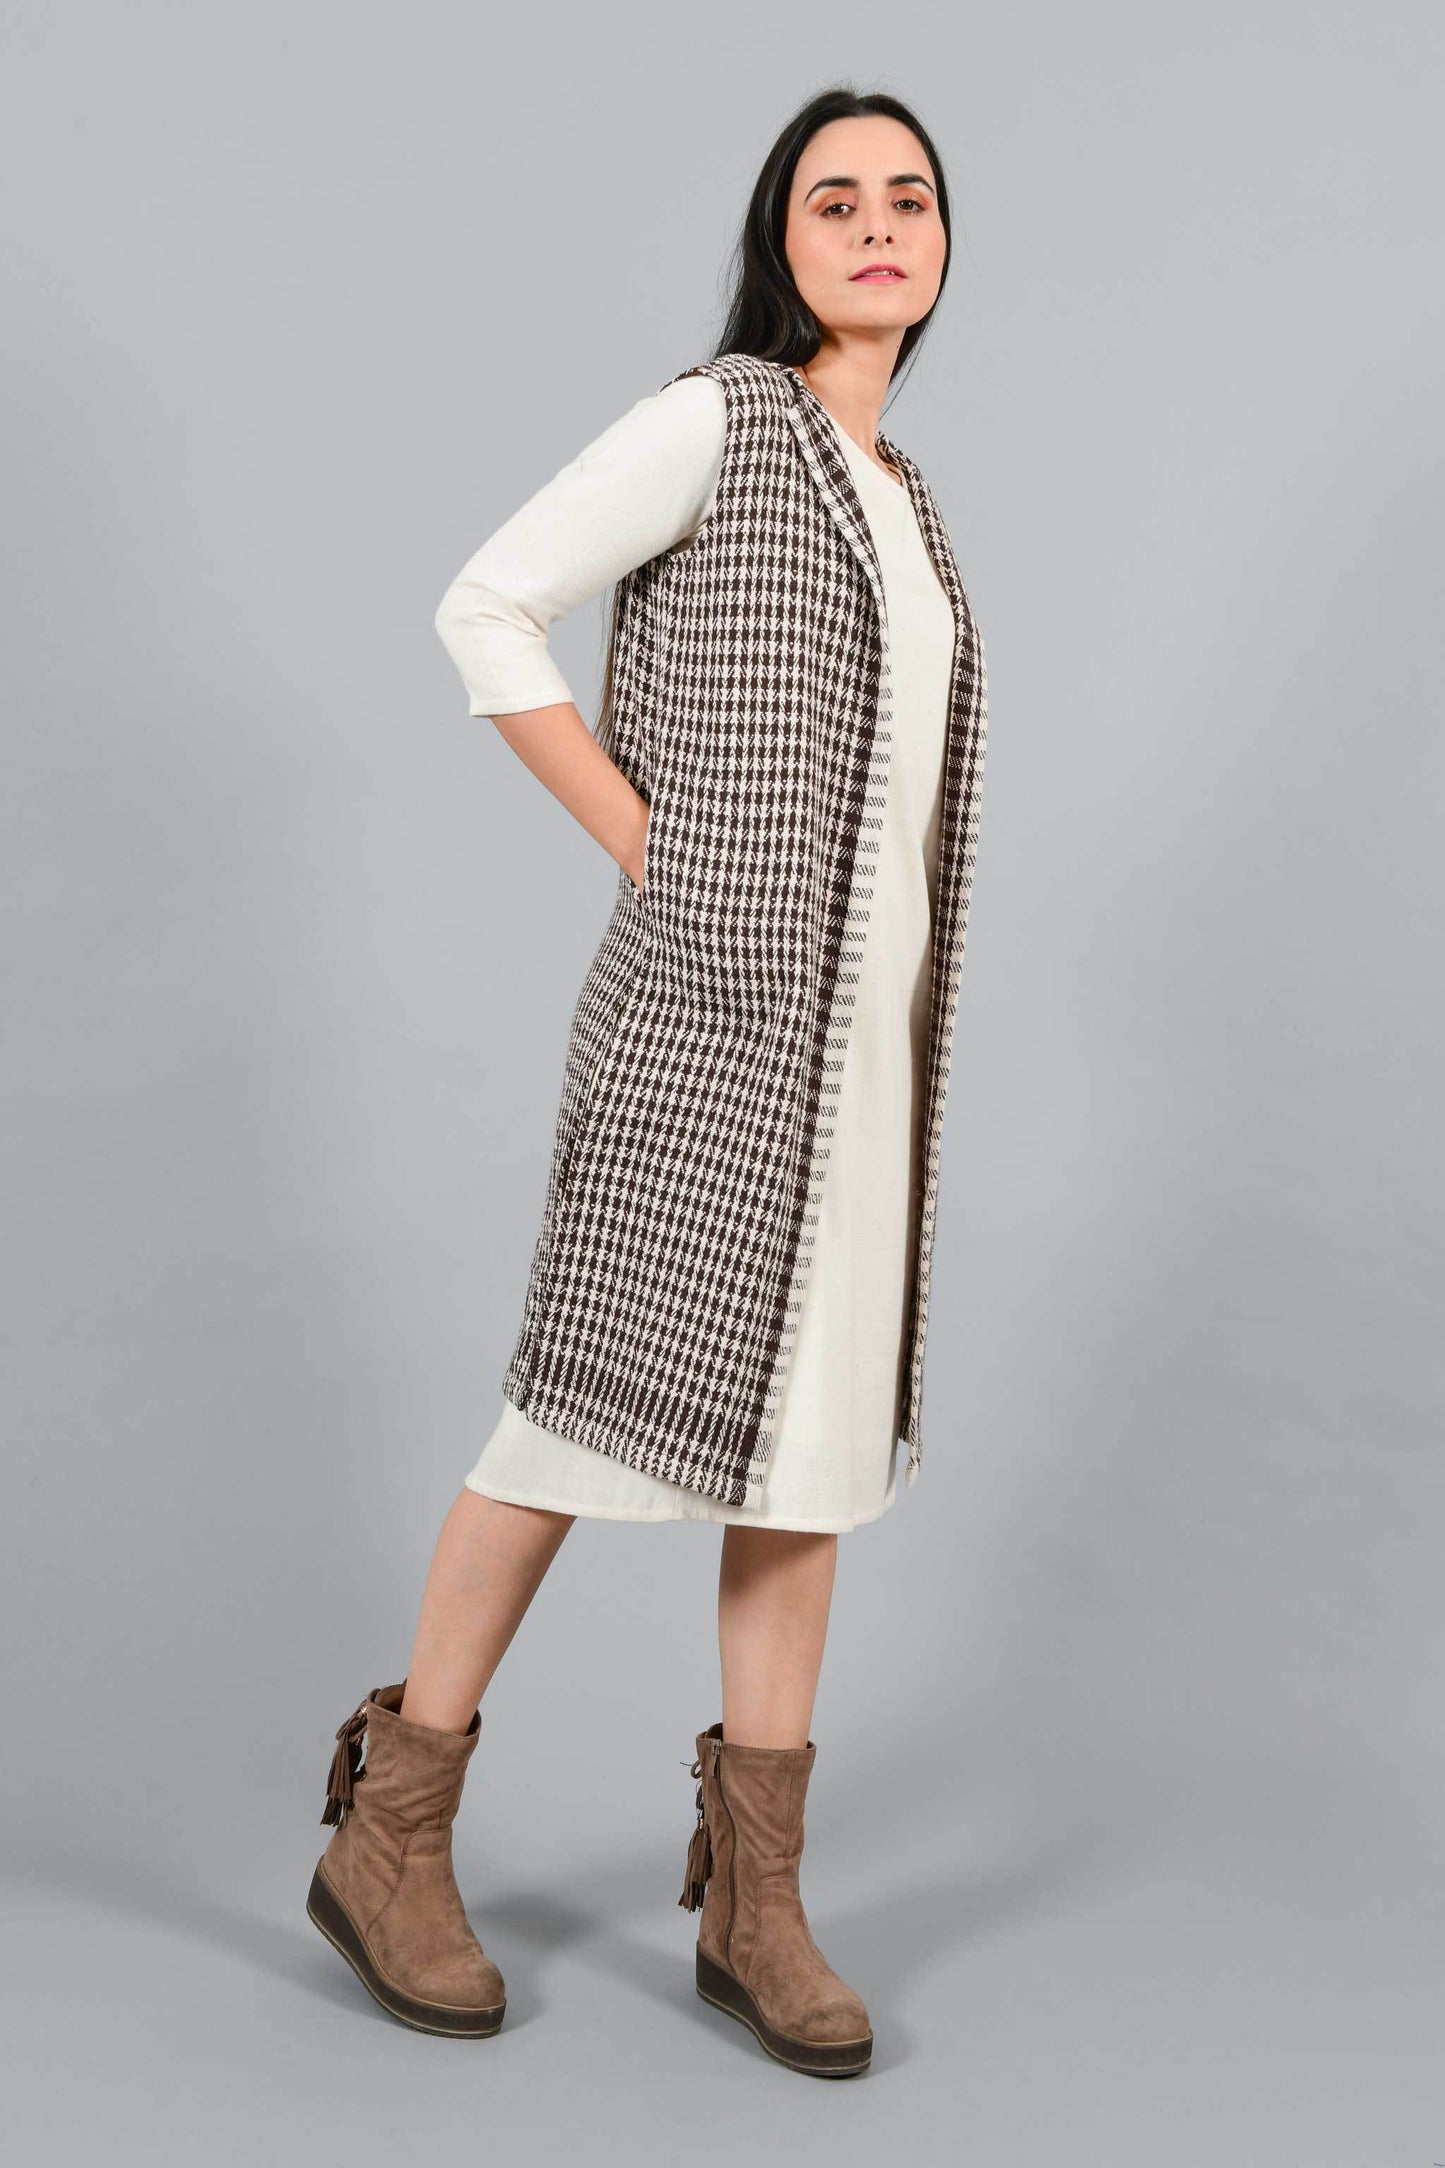 Side pose of an Indian Womenswear female model wearing Kora Brown handspun and handwoven khadi long Jacket over an off-white cashmere cotton dress by Cotton Rack.